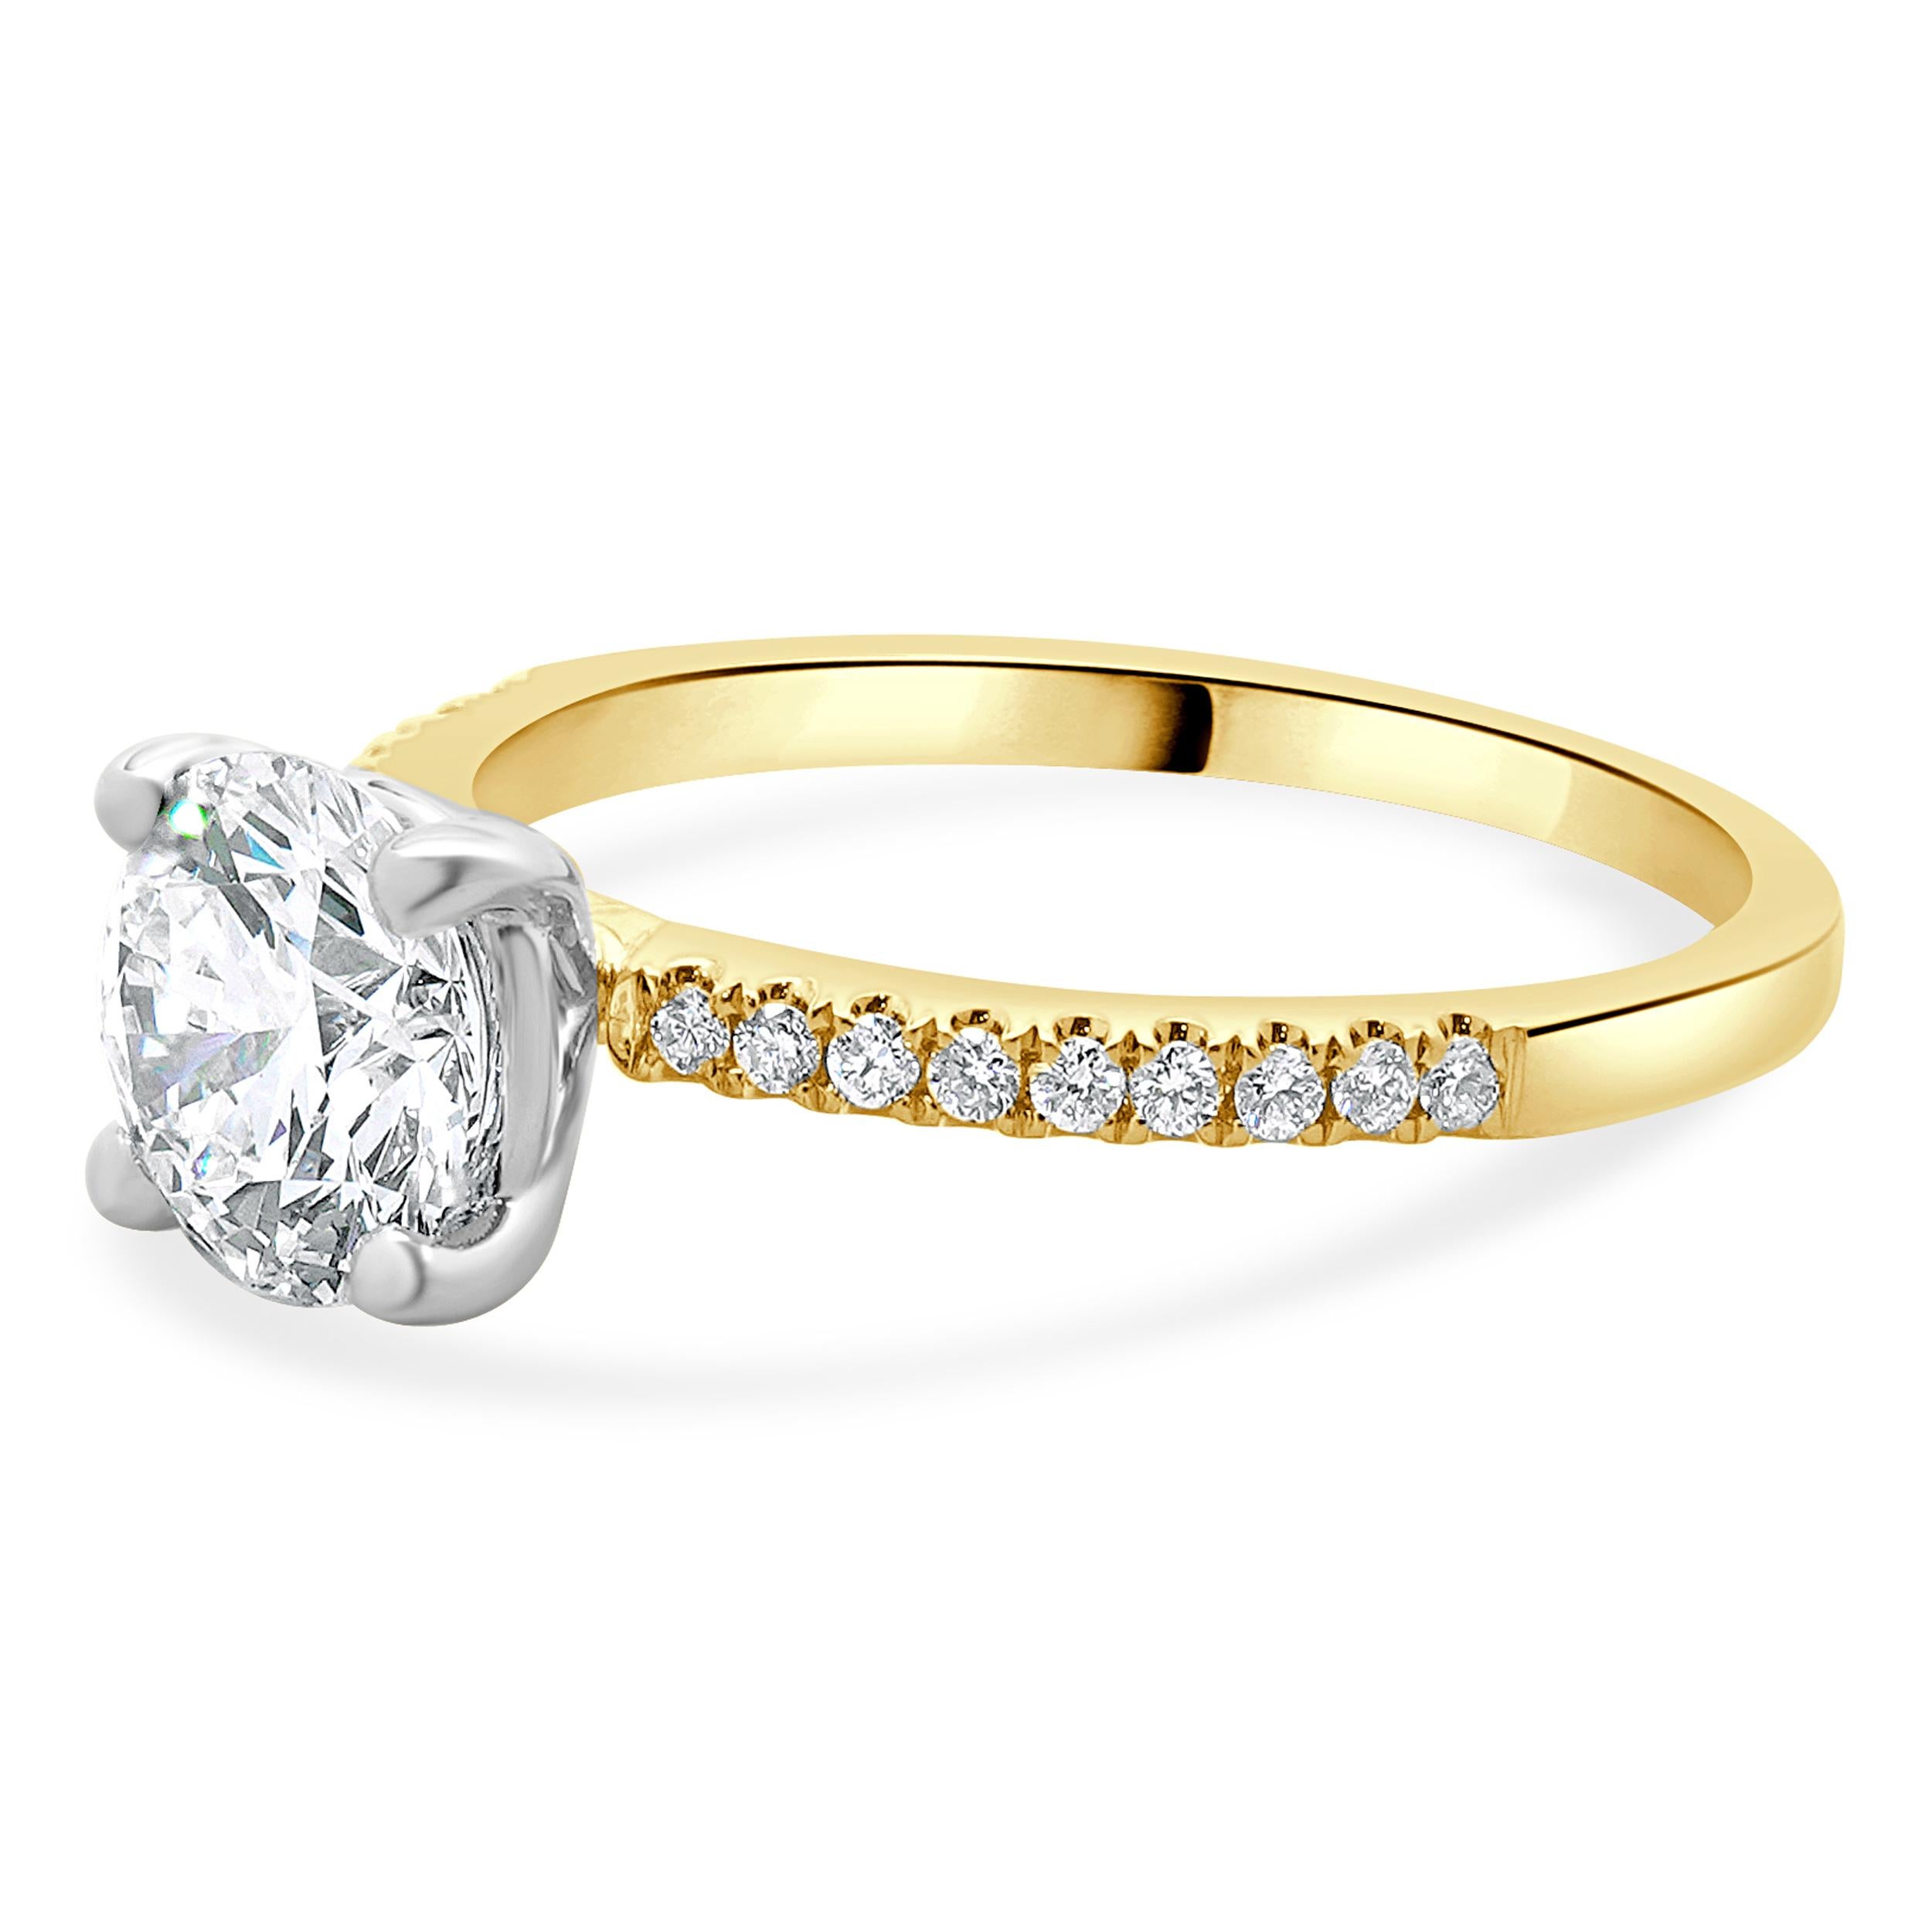 Designer: custom
Material: 14K yellow gold
Diamond: 1 round brilliant cut = 1.33ct
Color: I
Clarity: VS1
Diamond: 18 round brilliant = 0.54cttw
Color: G
Clarity: SI1
Ring Size: 6.75 (complimentary sizing available)
Weight: 2.57 grams
